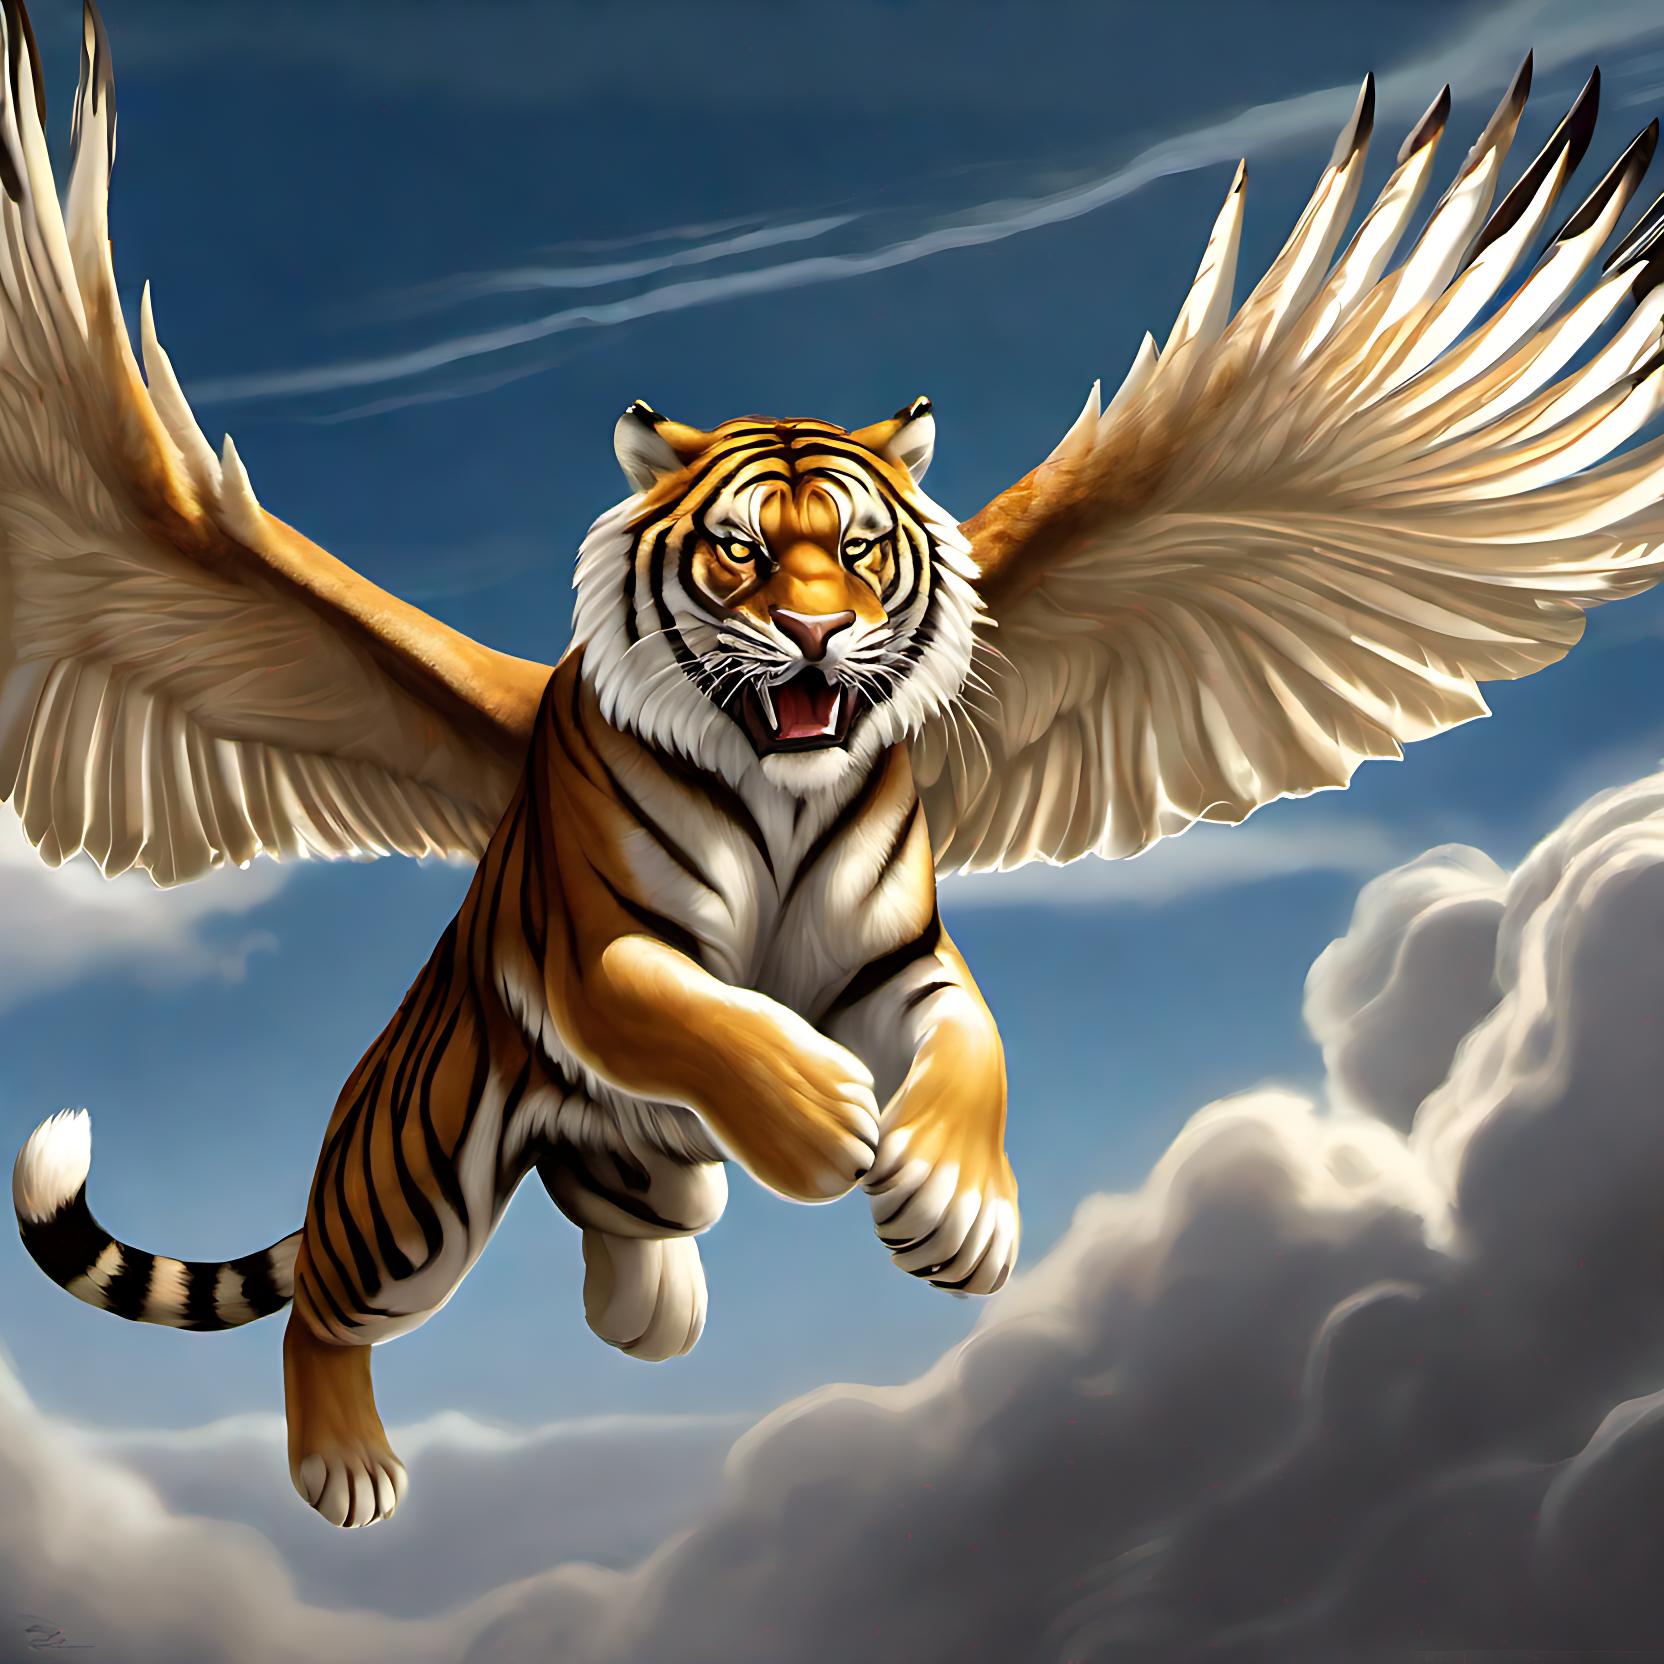 12,620 Tiger Pose Images, Stock Photos, 3D objects, & Vectors | Shutterstock